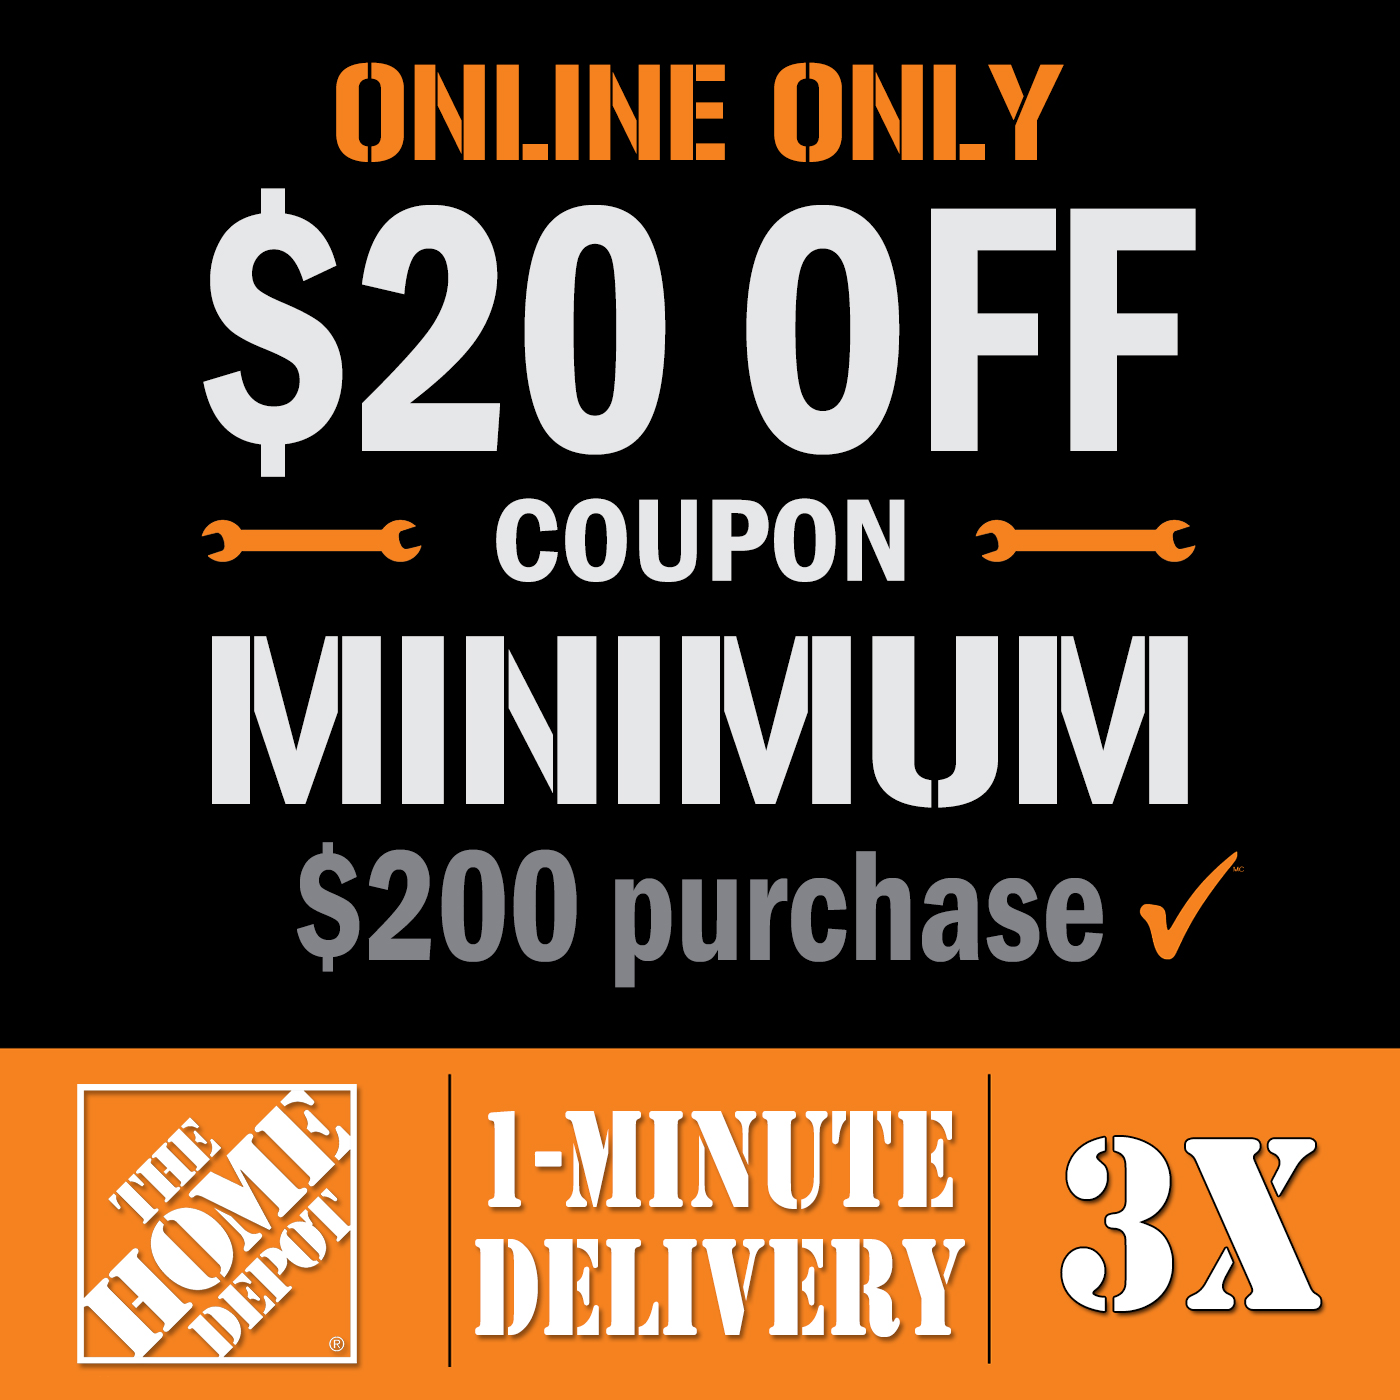 Home Depot Coupon Three (3x) 20 Off 200 Online Orders Premium